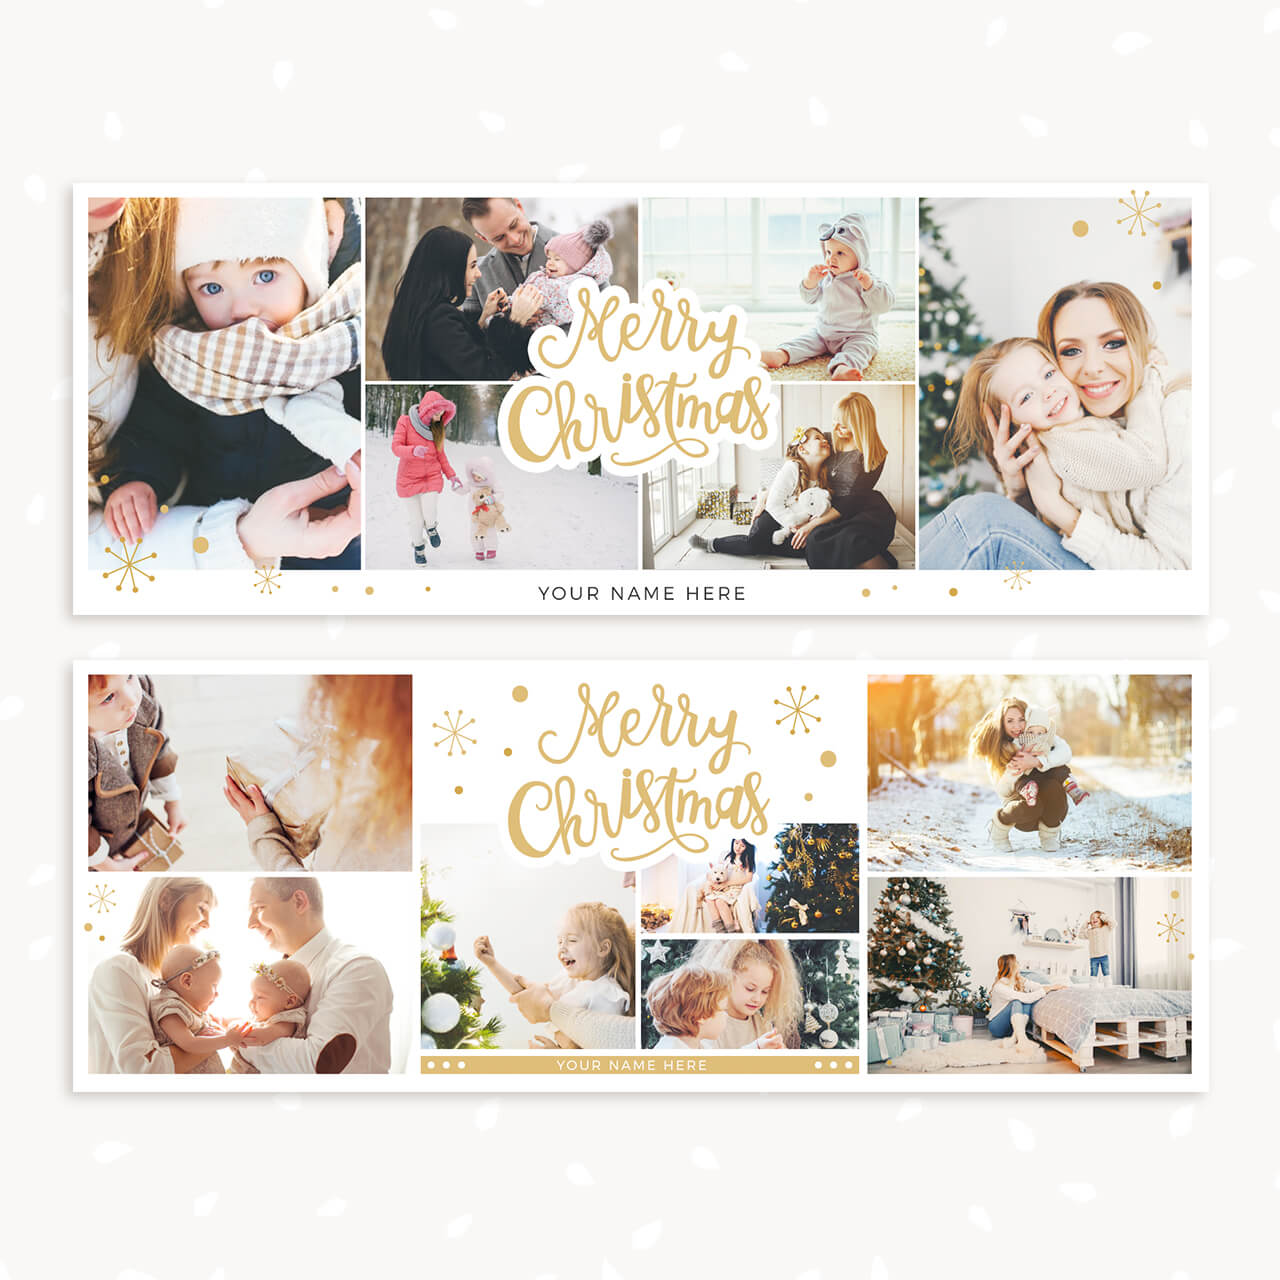 Christmas Facebook Headers Collage Template